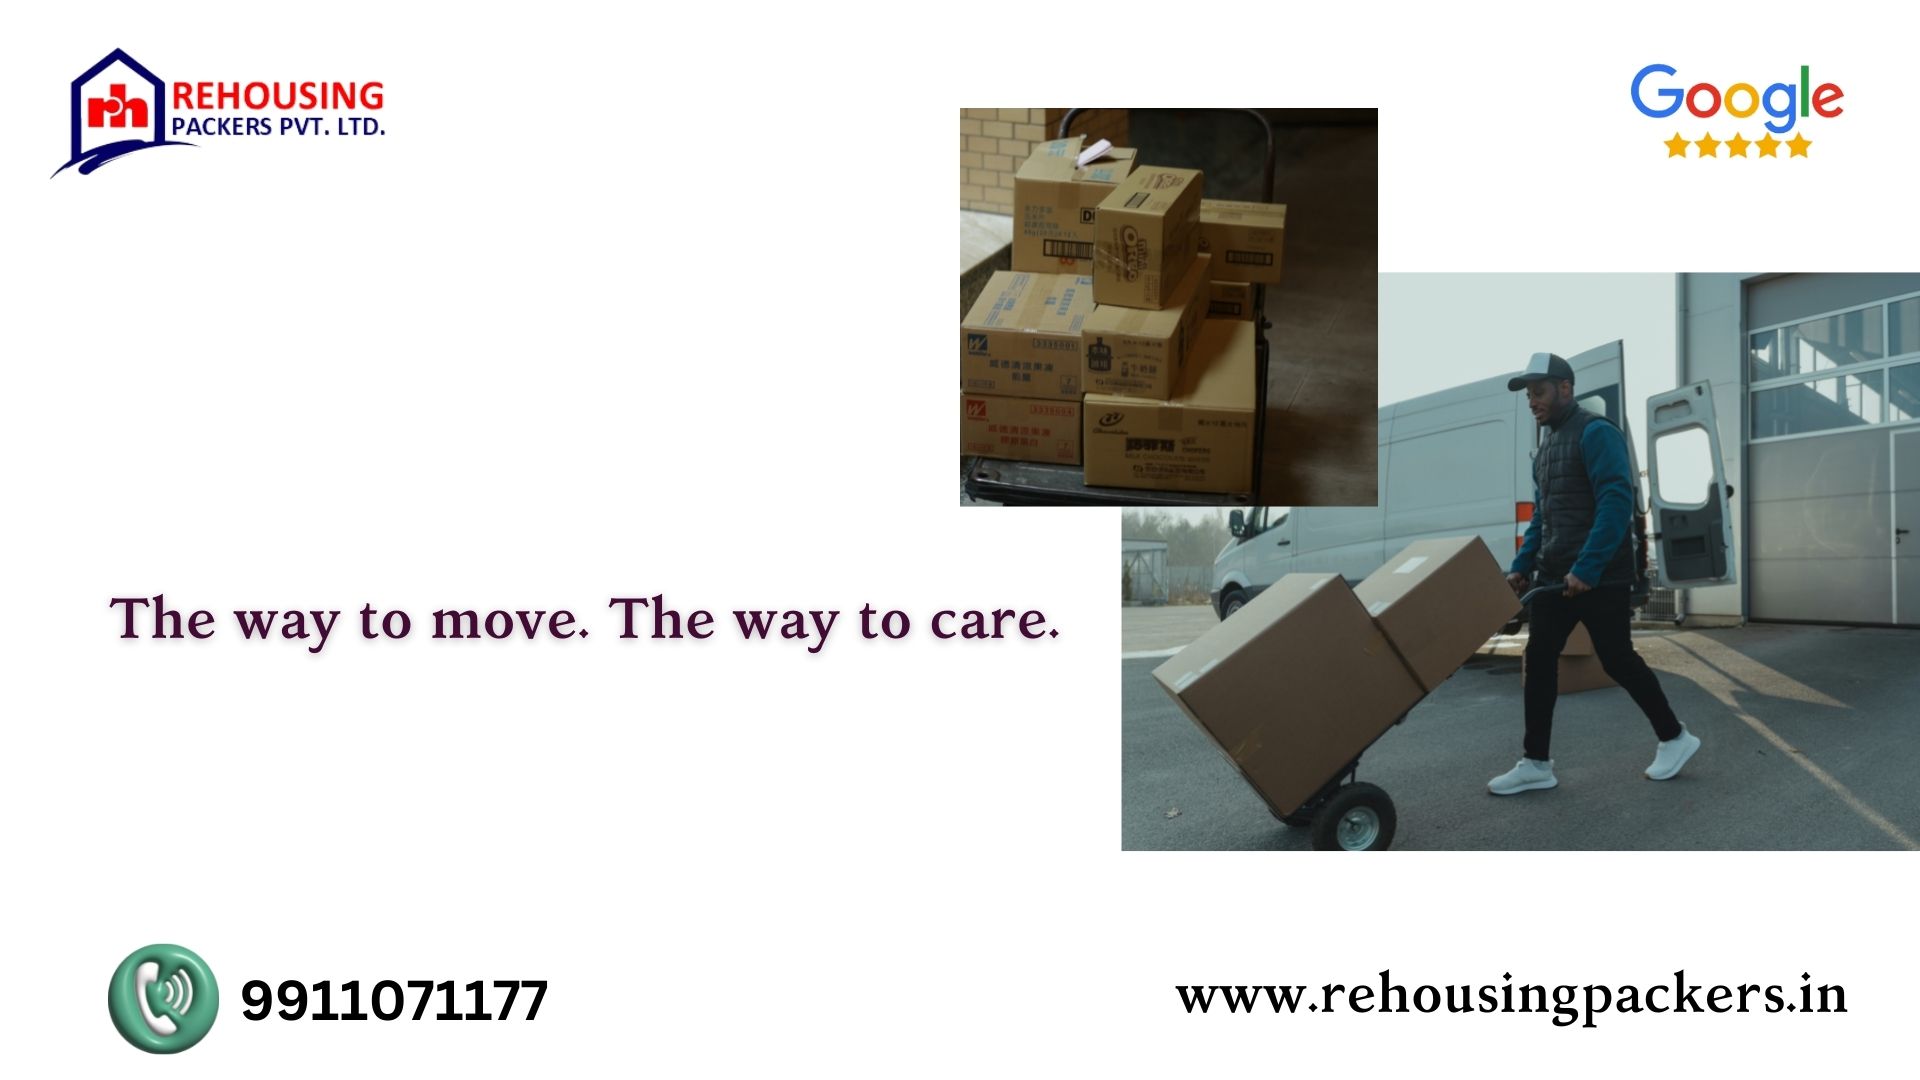 our courier services from Hyderabad to Chennai